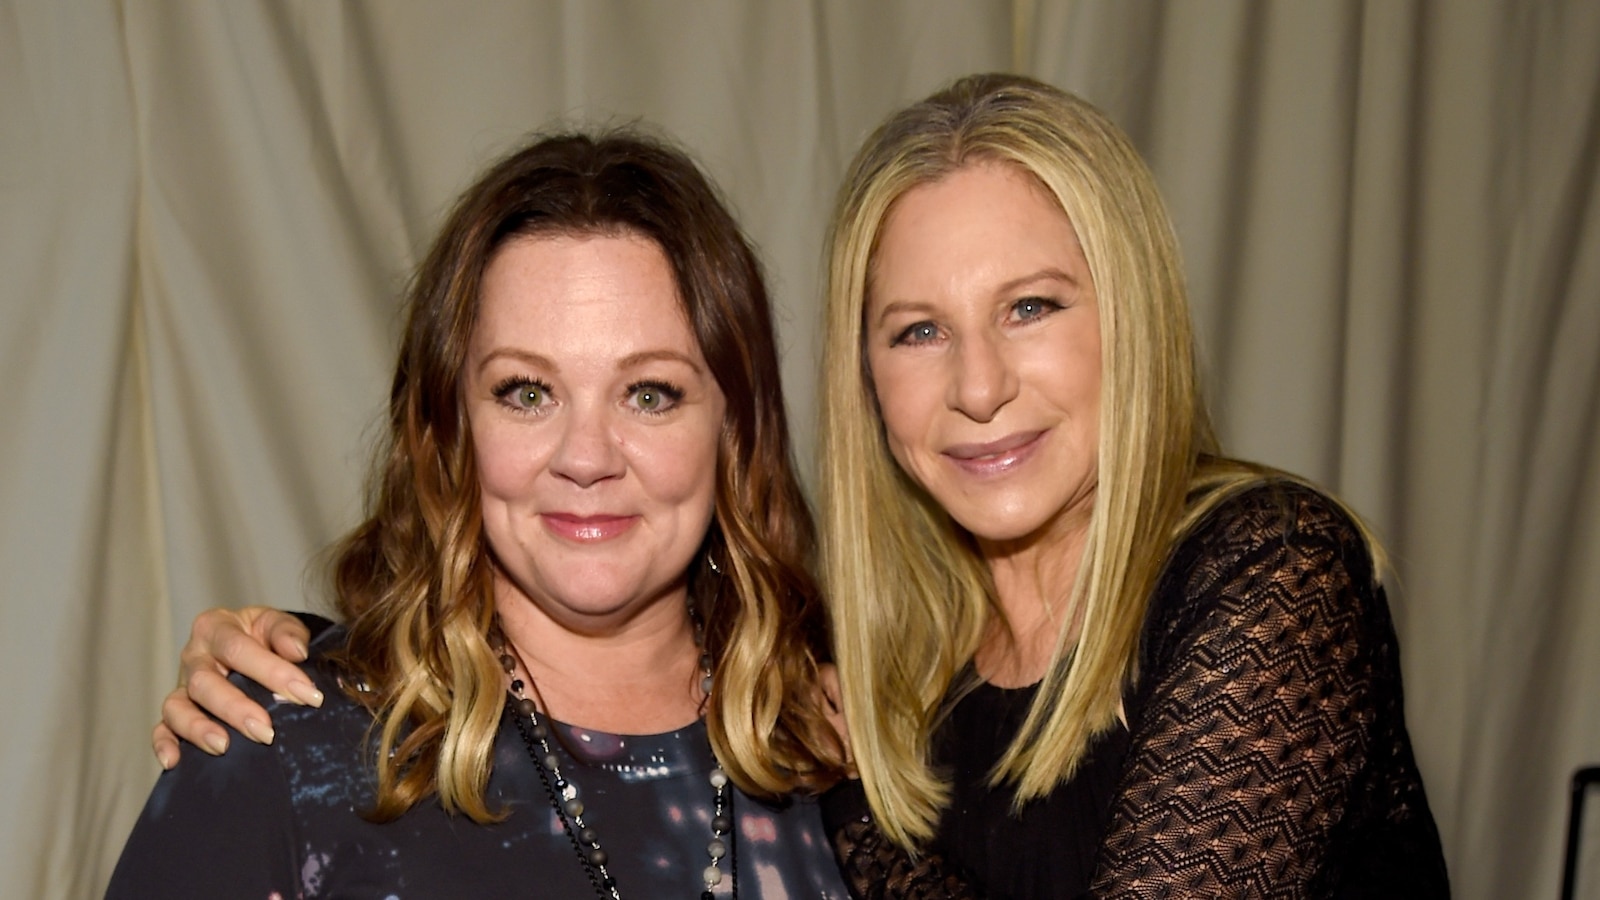 Barbra Streisand publicly asks Melissa McCarthy about Ozempic, sparking debate on weight and shaming